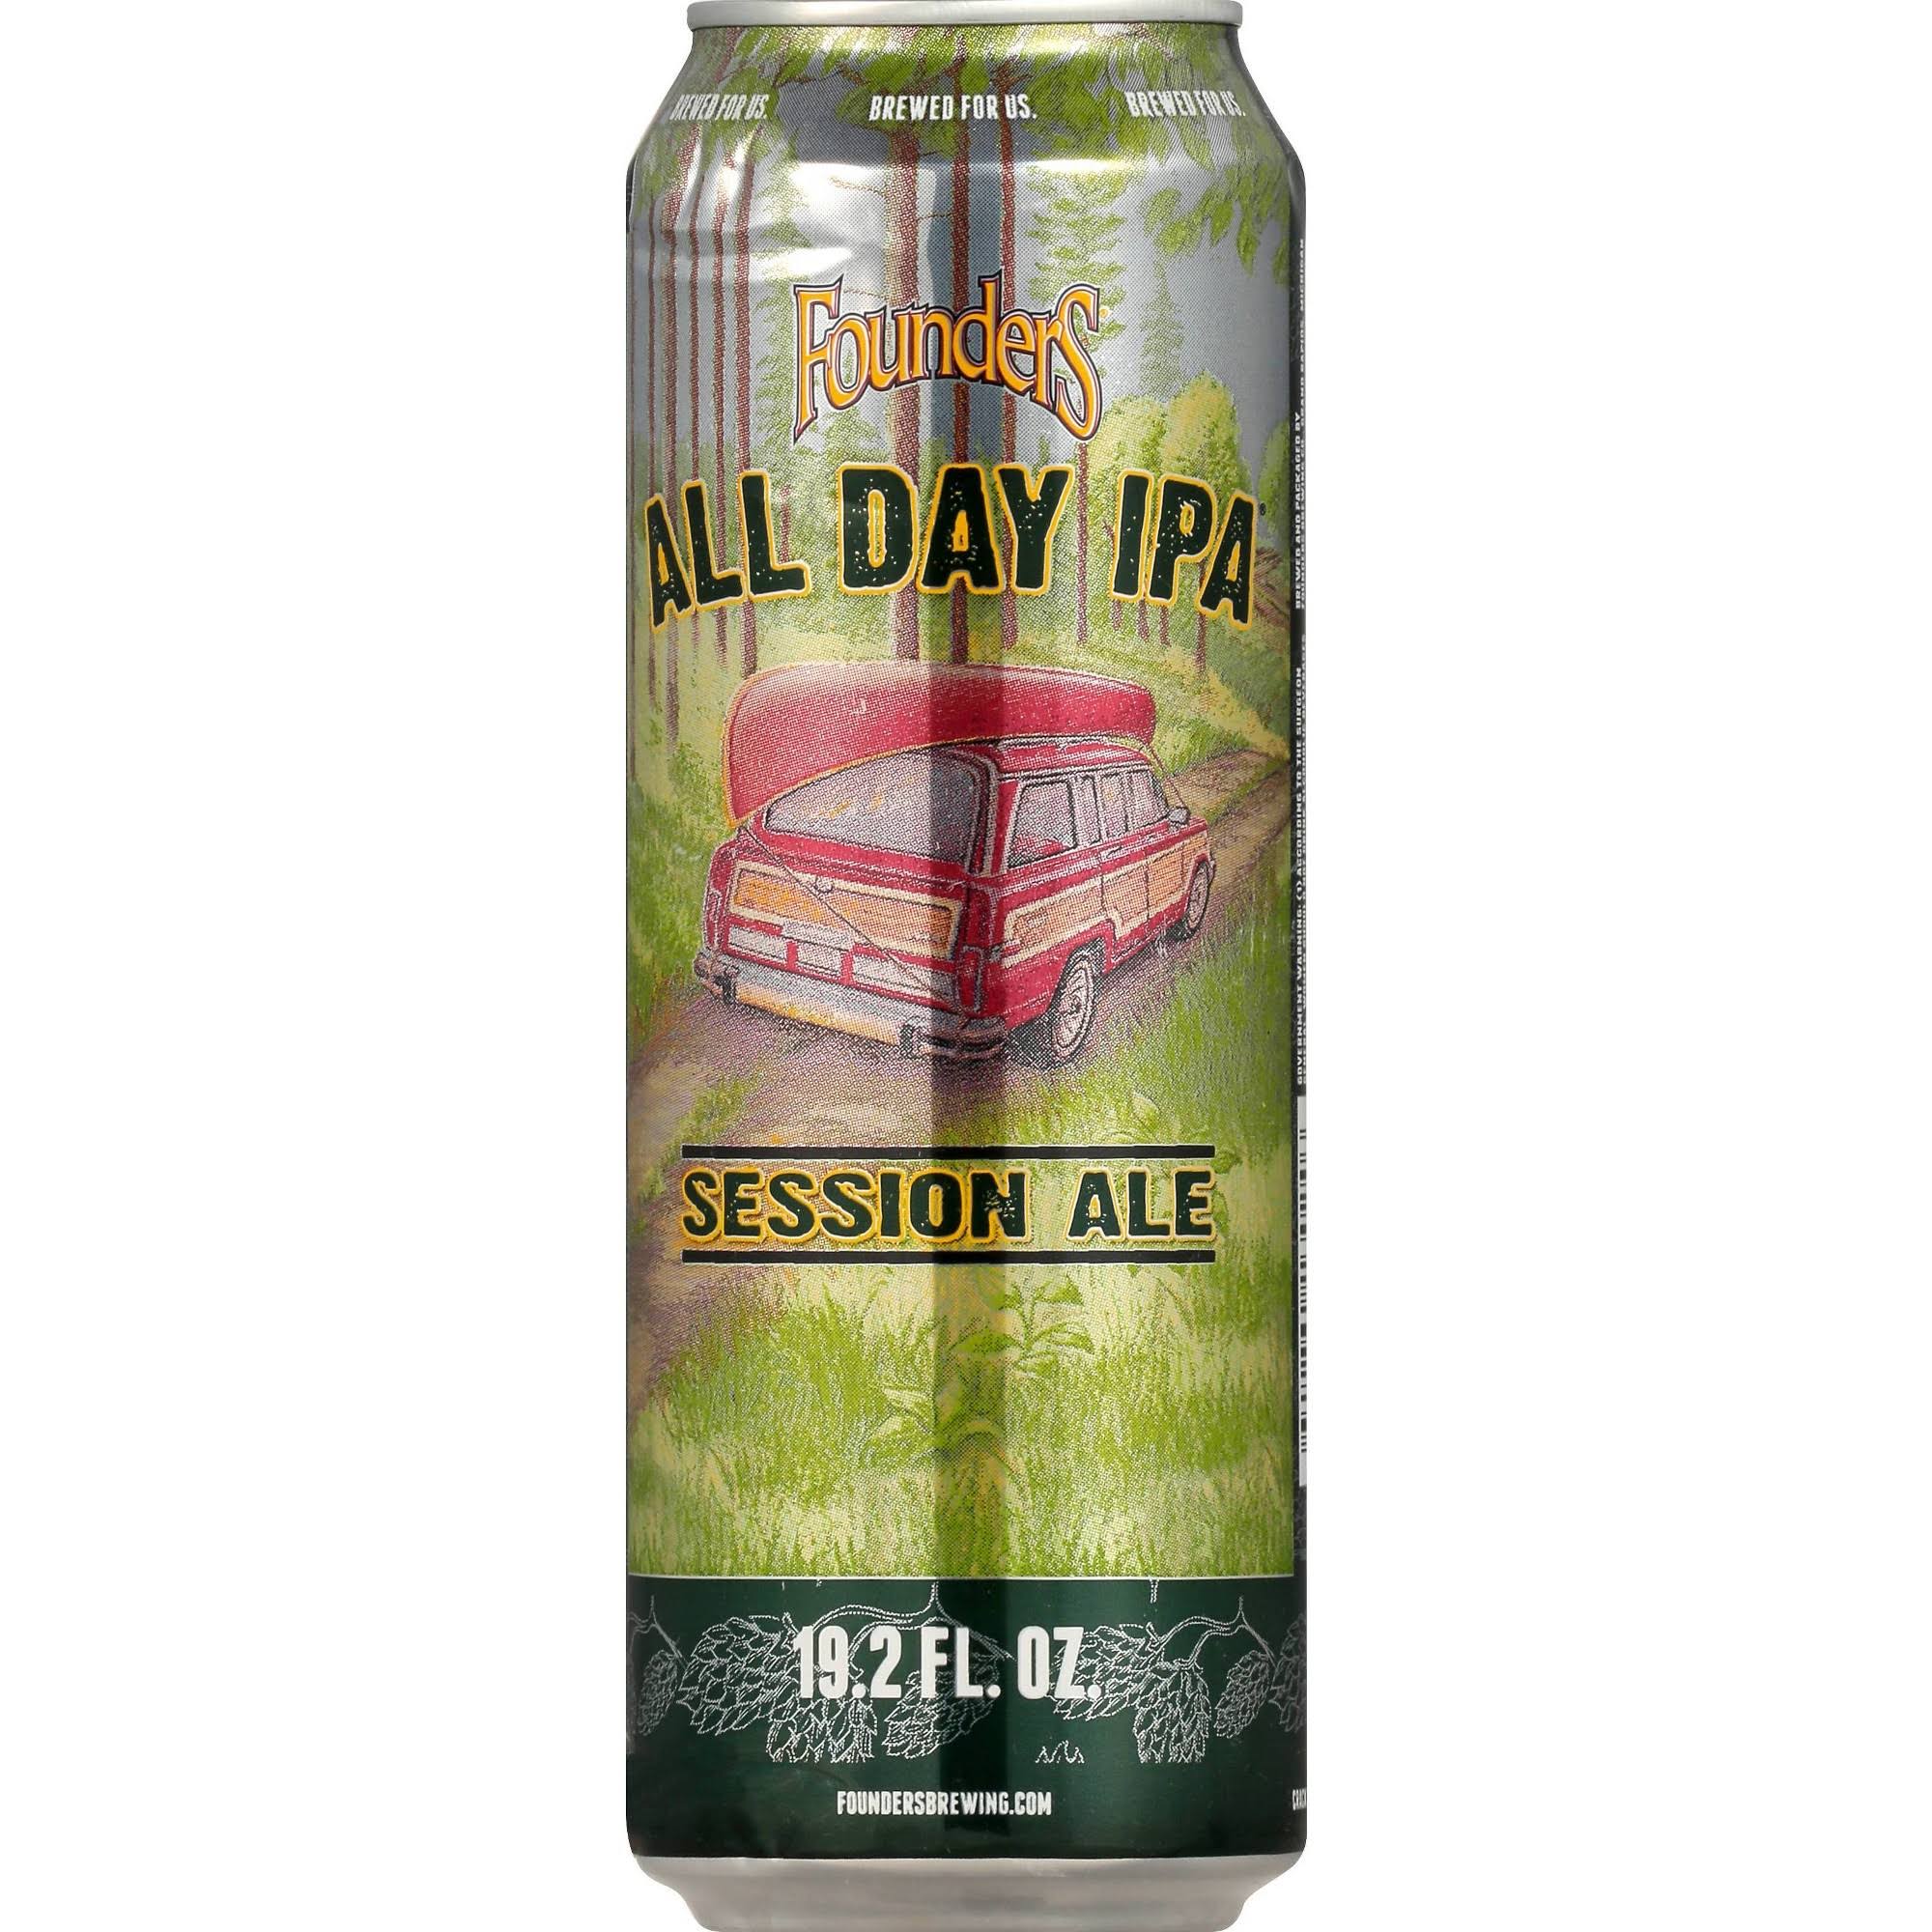 Founders Beer, All Day IPA - 19.2 fl oz